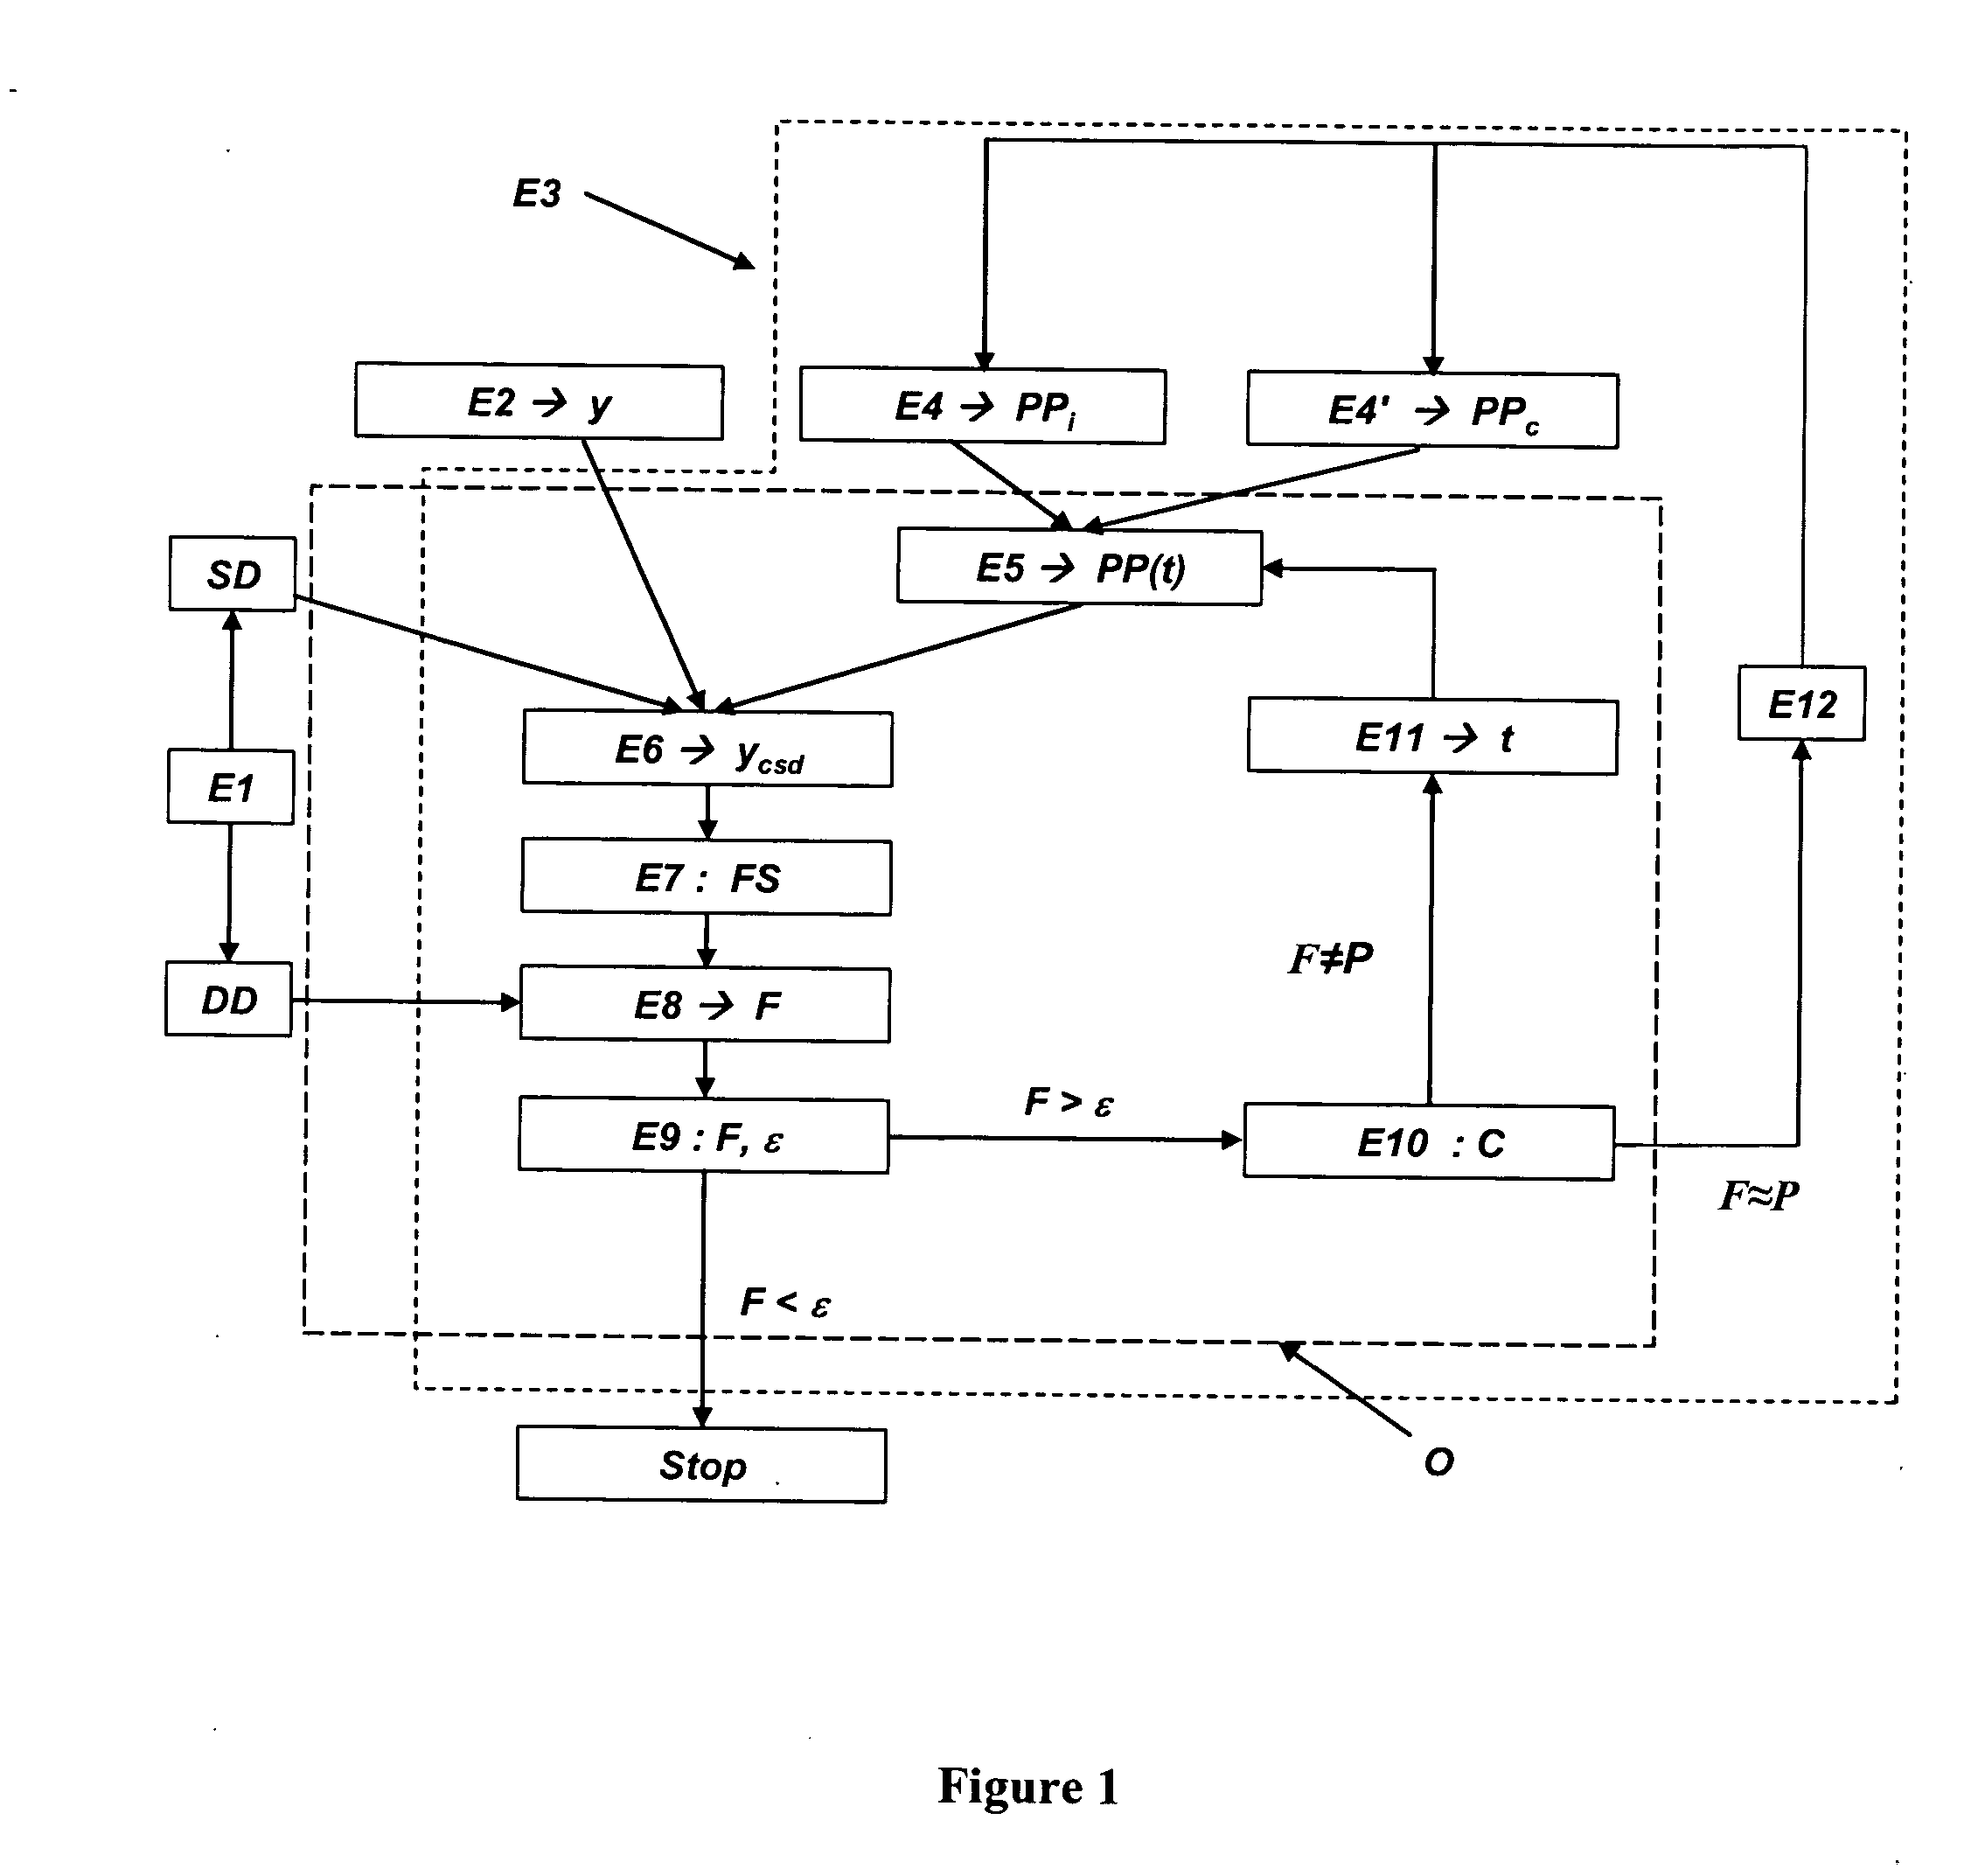 Method for updating a geological reservoir model by means of dynamic data